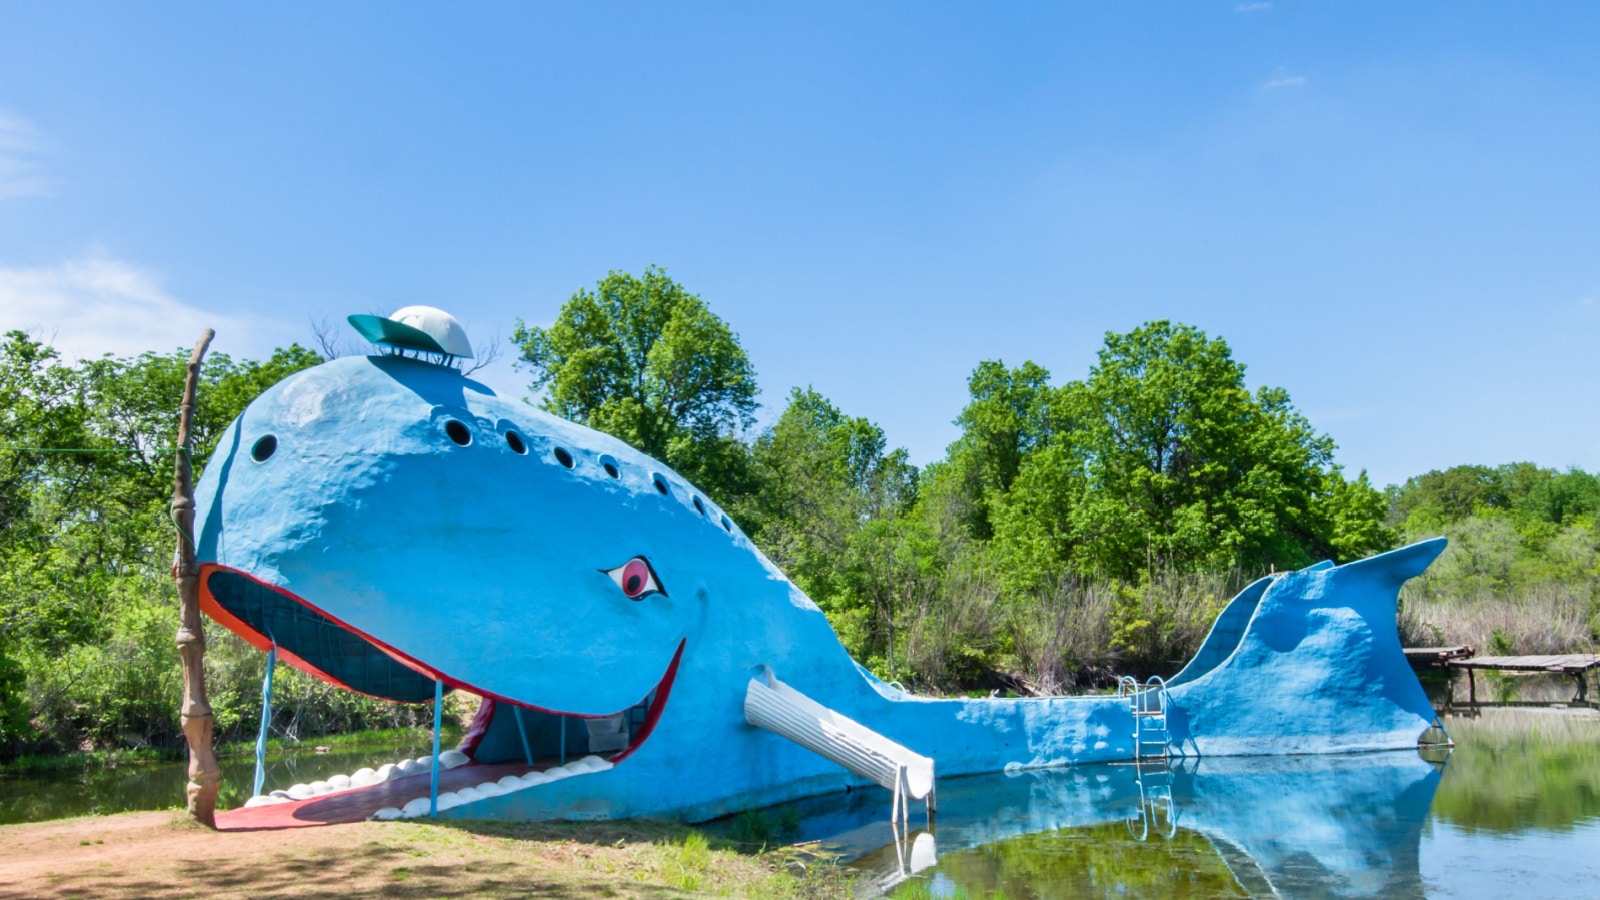 CATOOSA, OK/USA - MAY 7, 2013: Iconic Blue Whale floating in "Natures Acres" pond, on Route 66. Builder: Hugh Davis